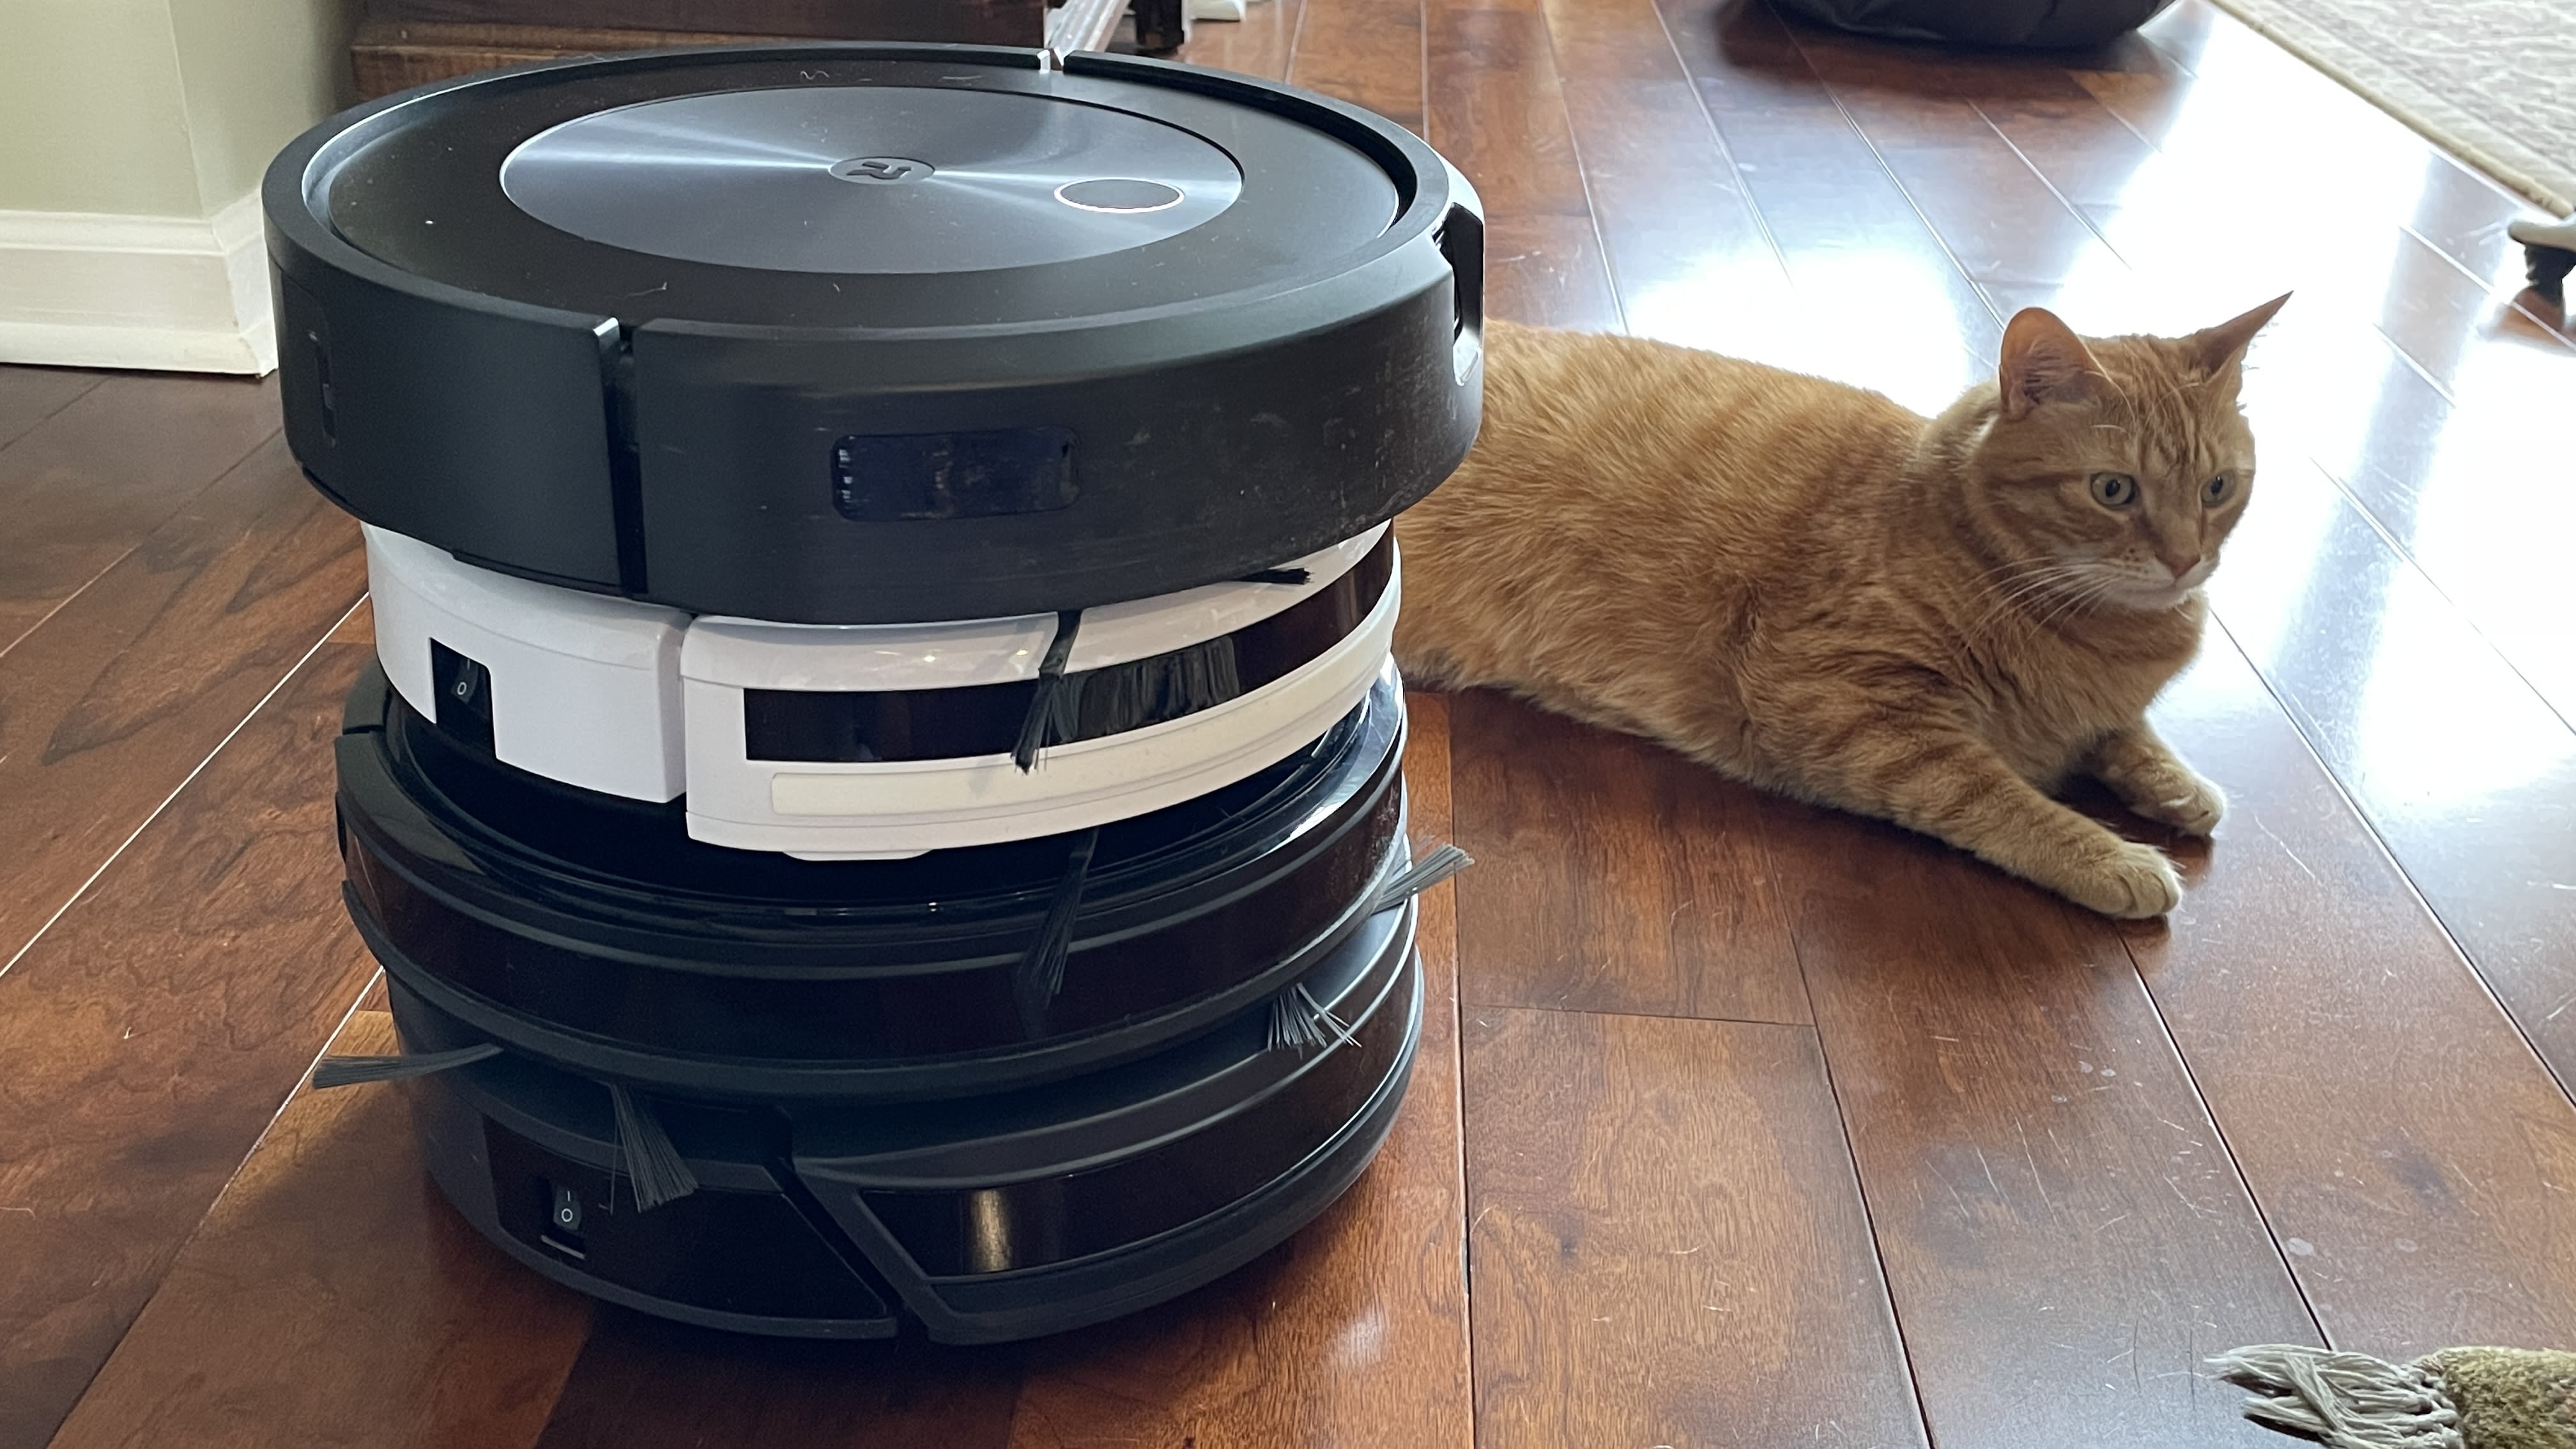 The Best Vacuums for Pet Hair in 2023, Tested and Reviewed